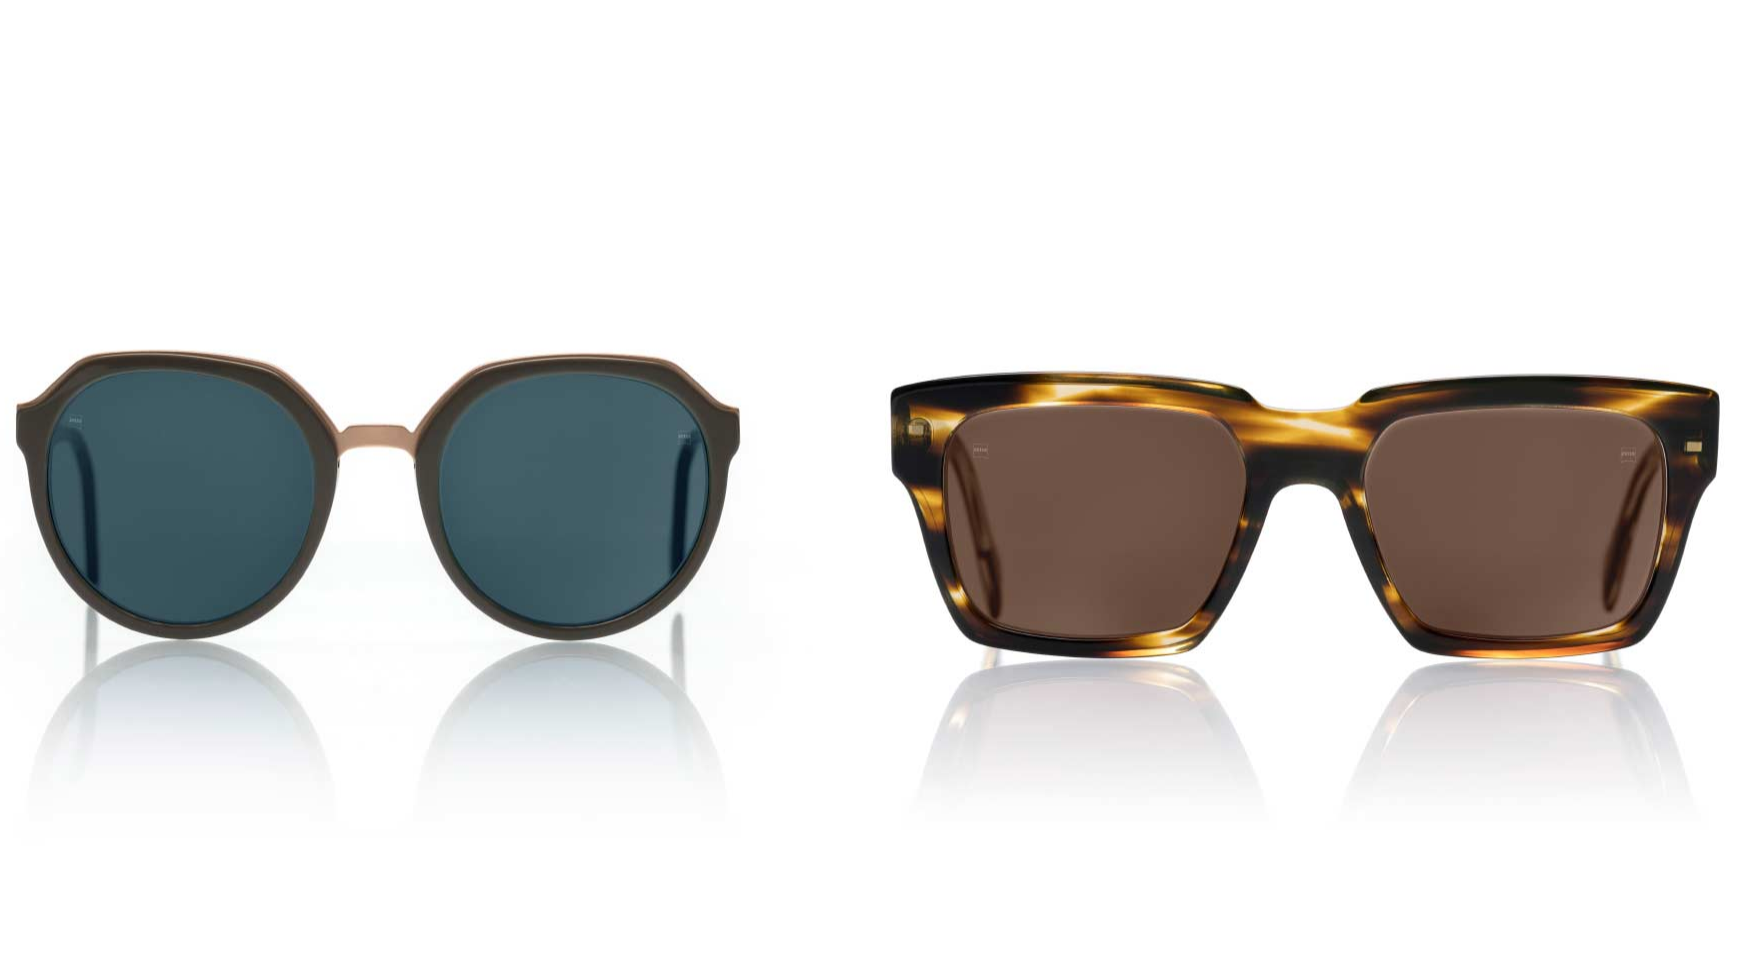 ZEISS PhotoFusion X, are available in natural, modern colours - just like normal sun lenses